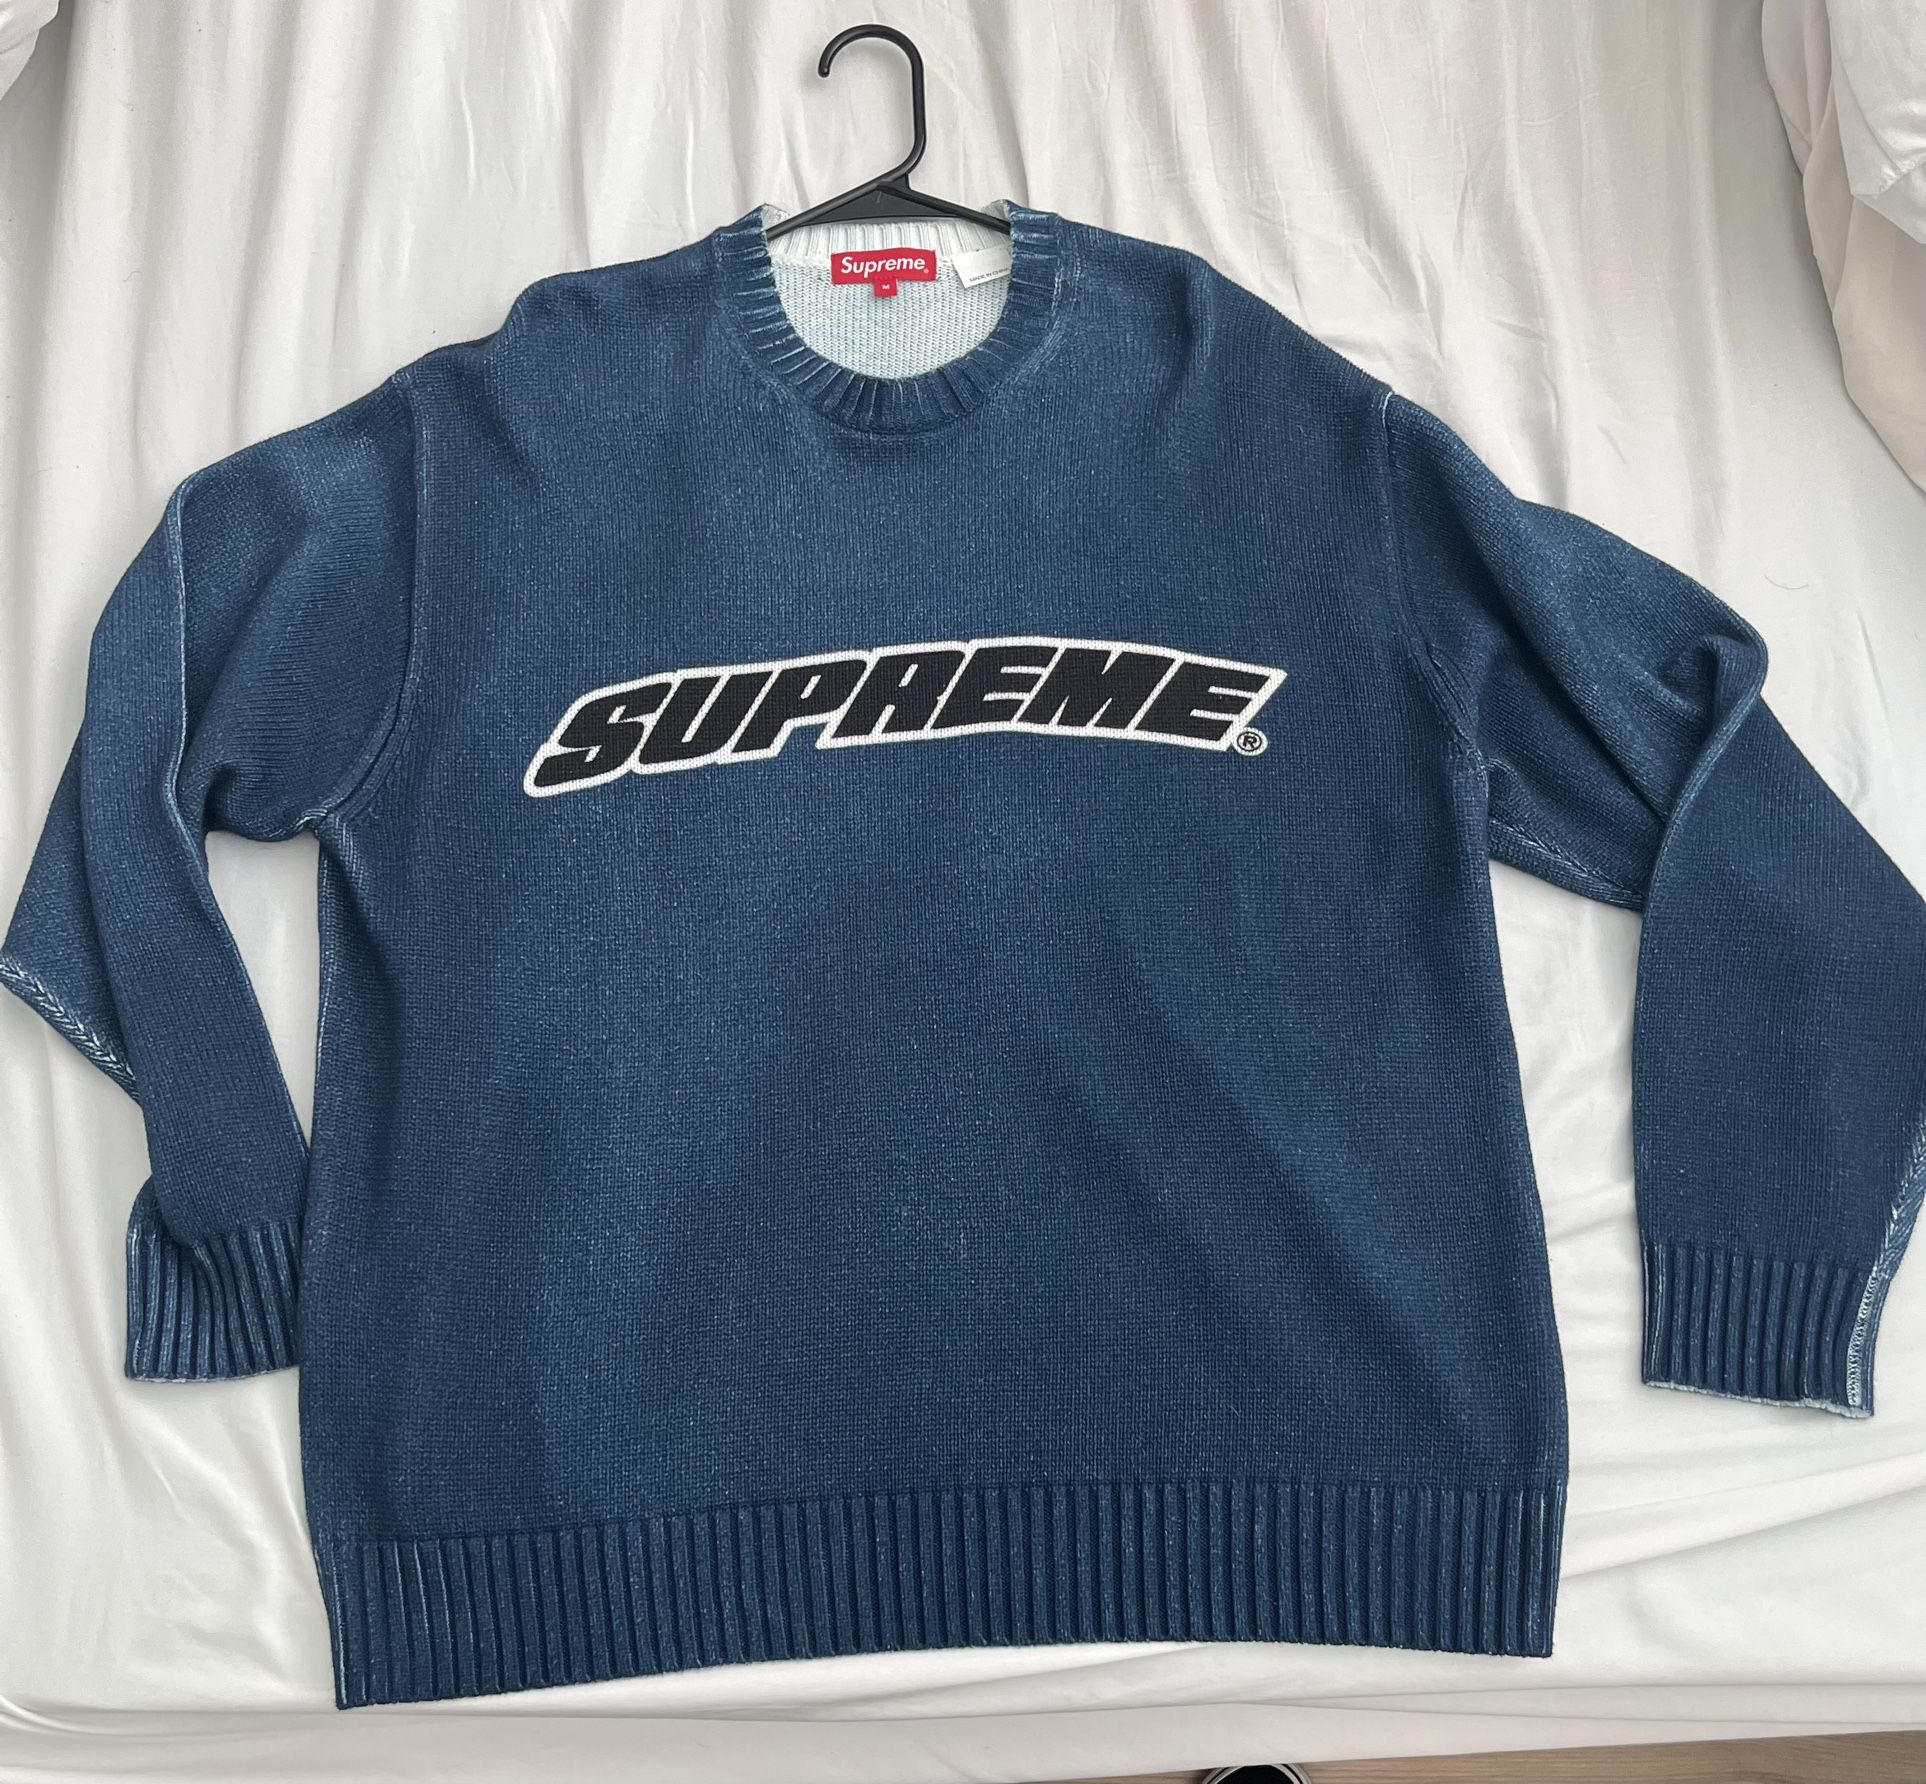 Supreme Printed Washed Sweater for Sale in Fullerton, CA - OfferUp